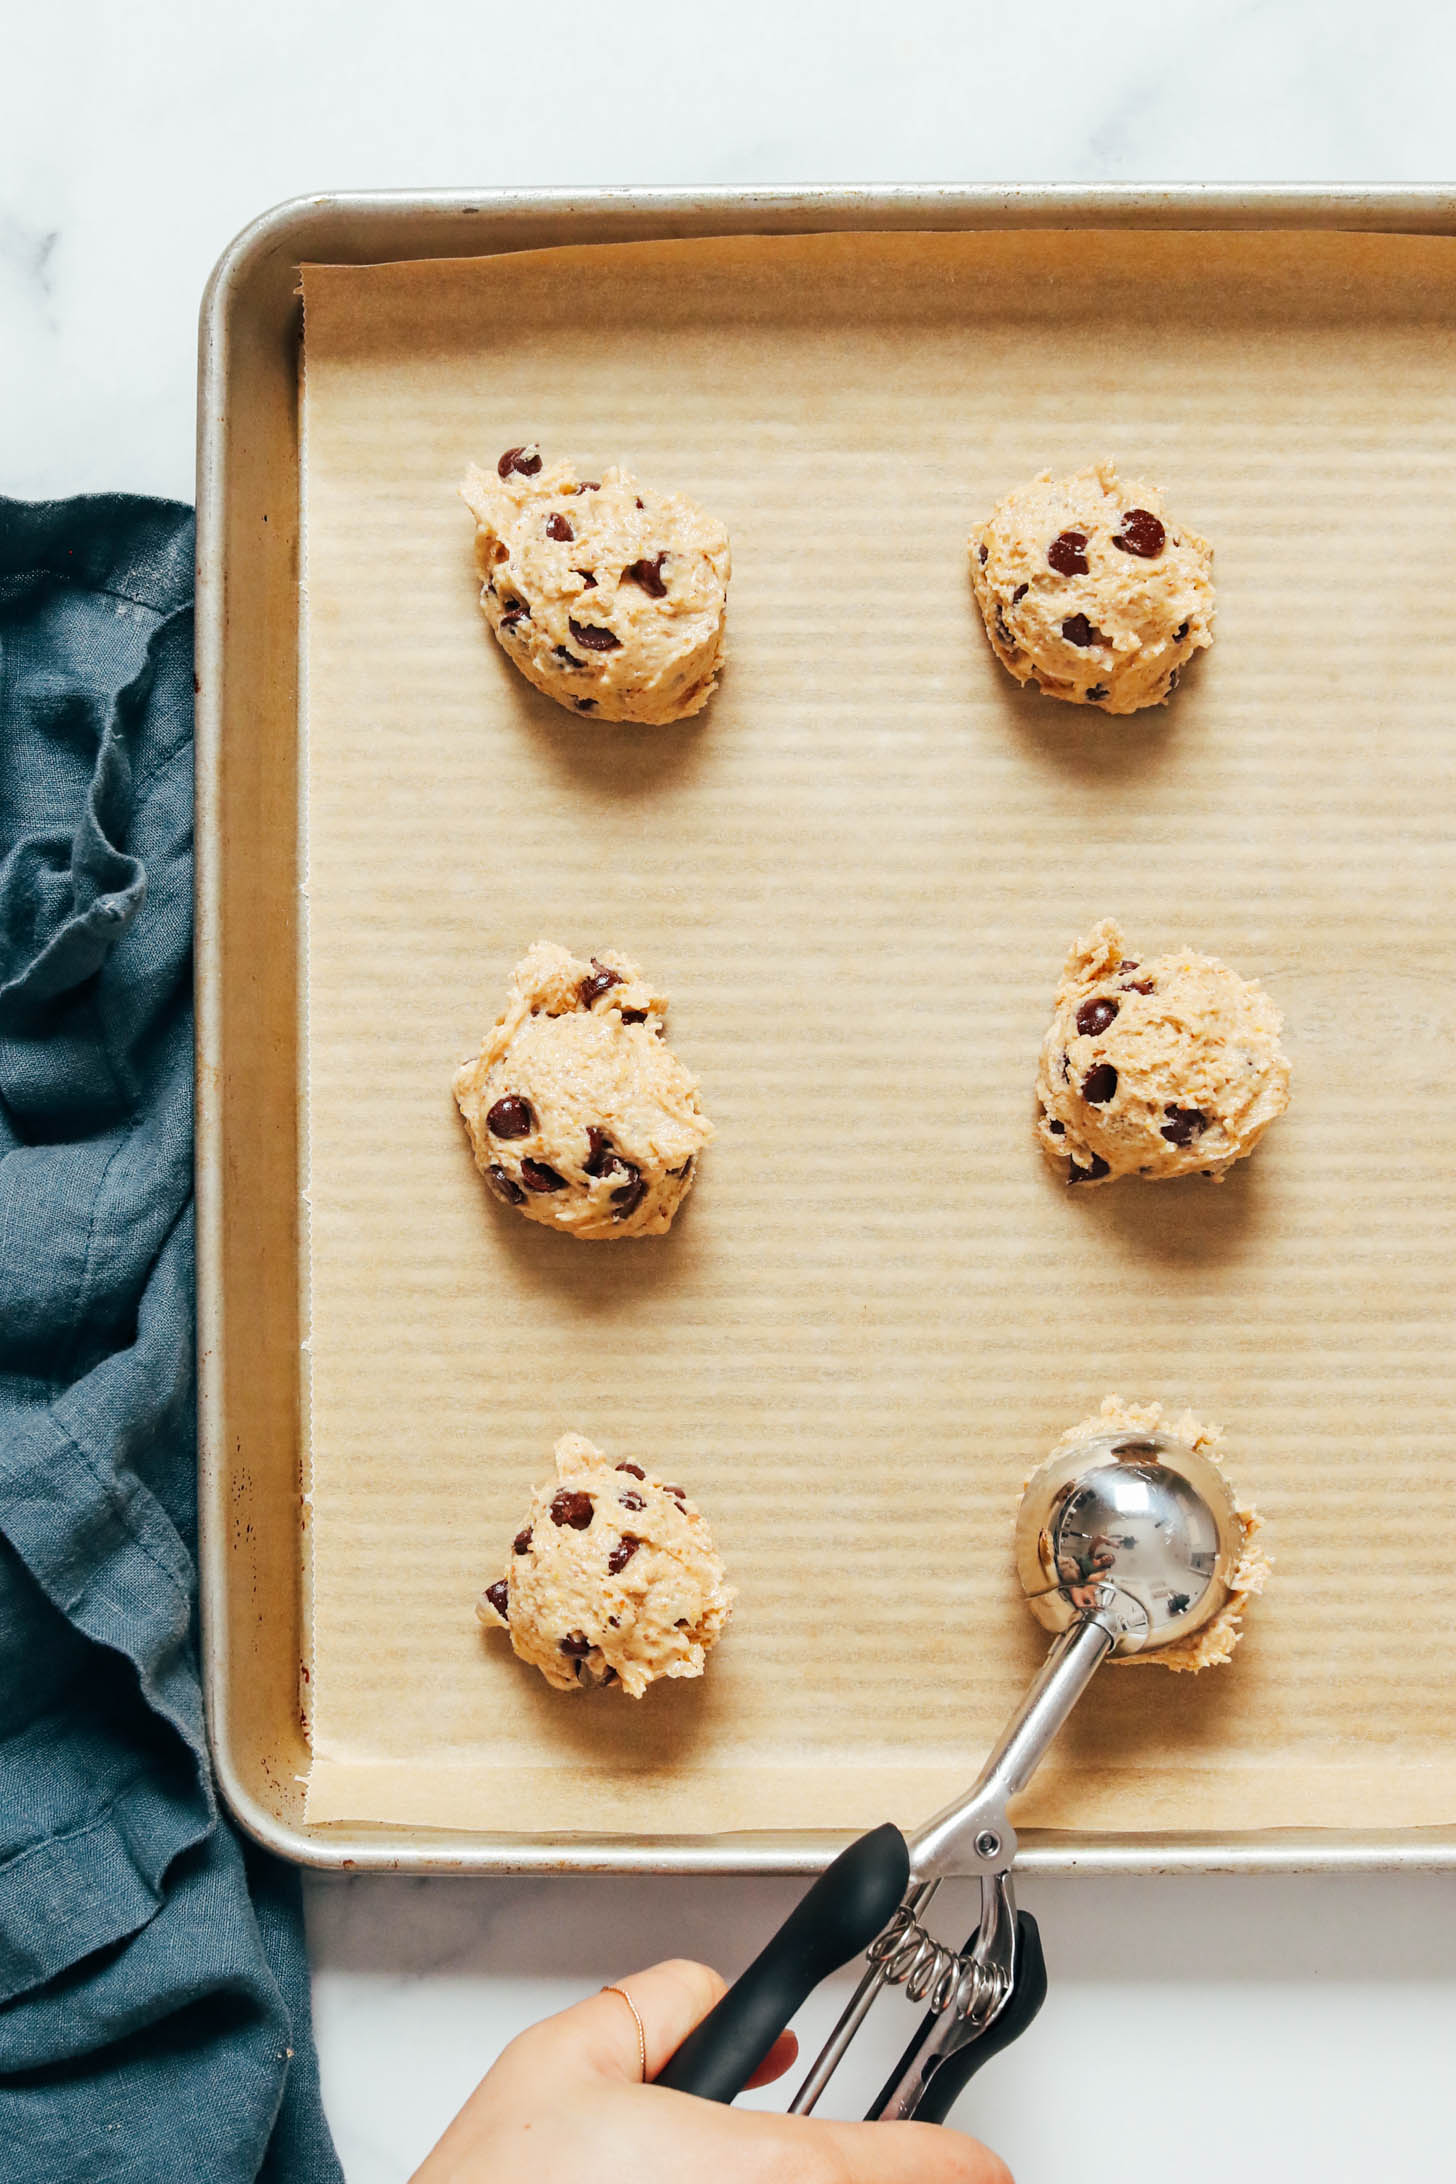 Scooping balls of chocolate chip cookie dough on a parchment-lined baking sheet